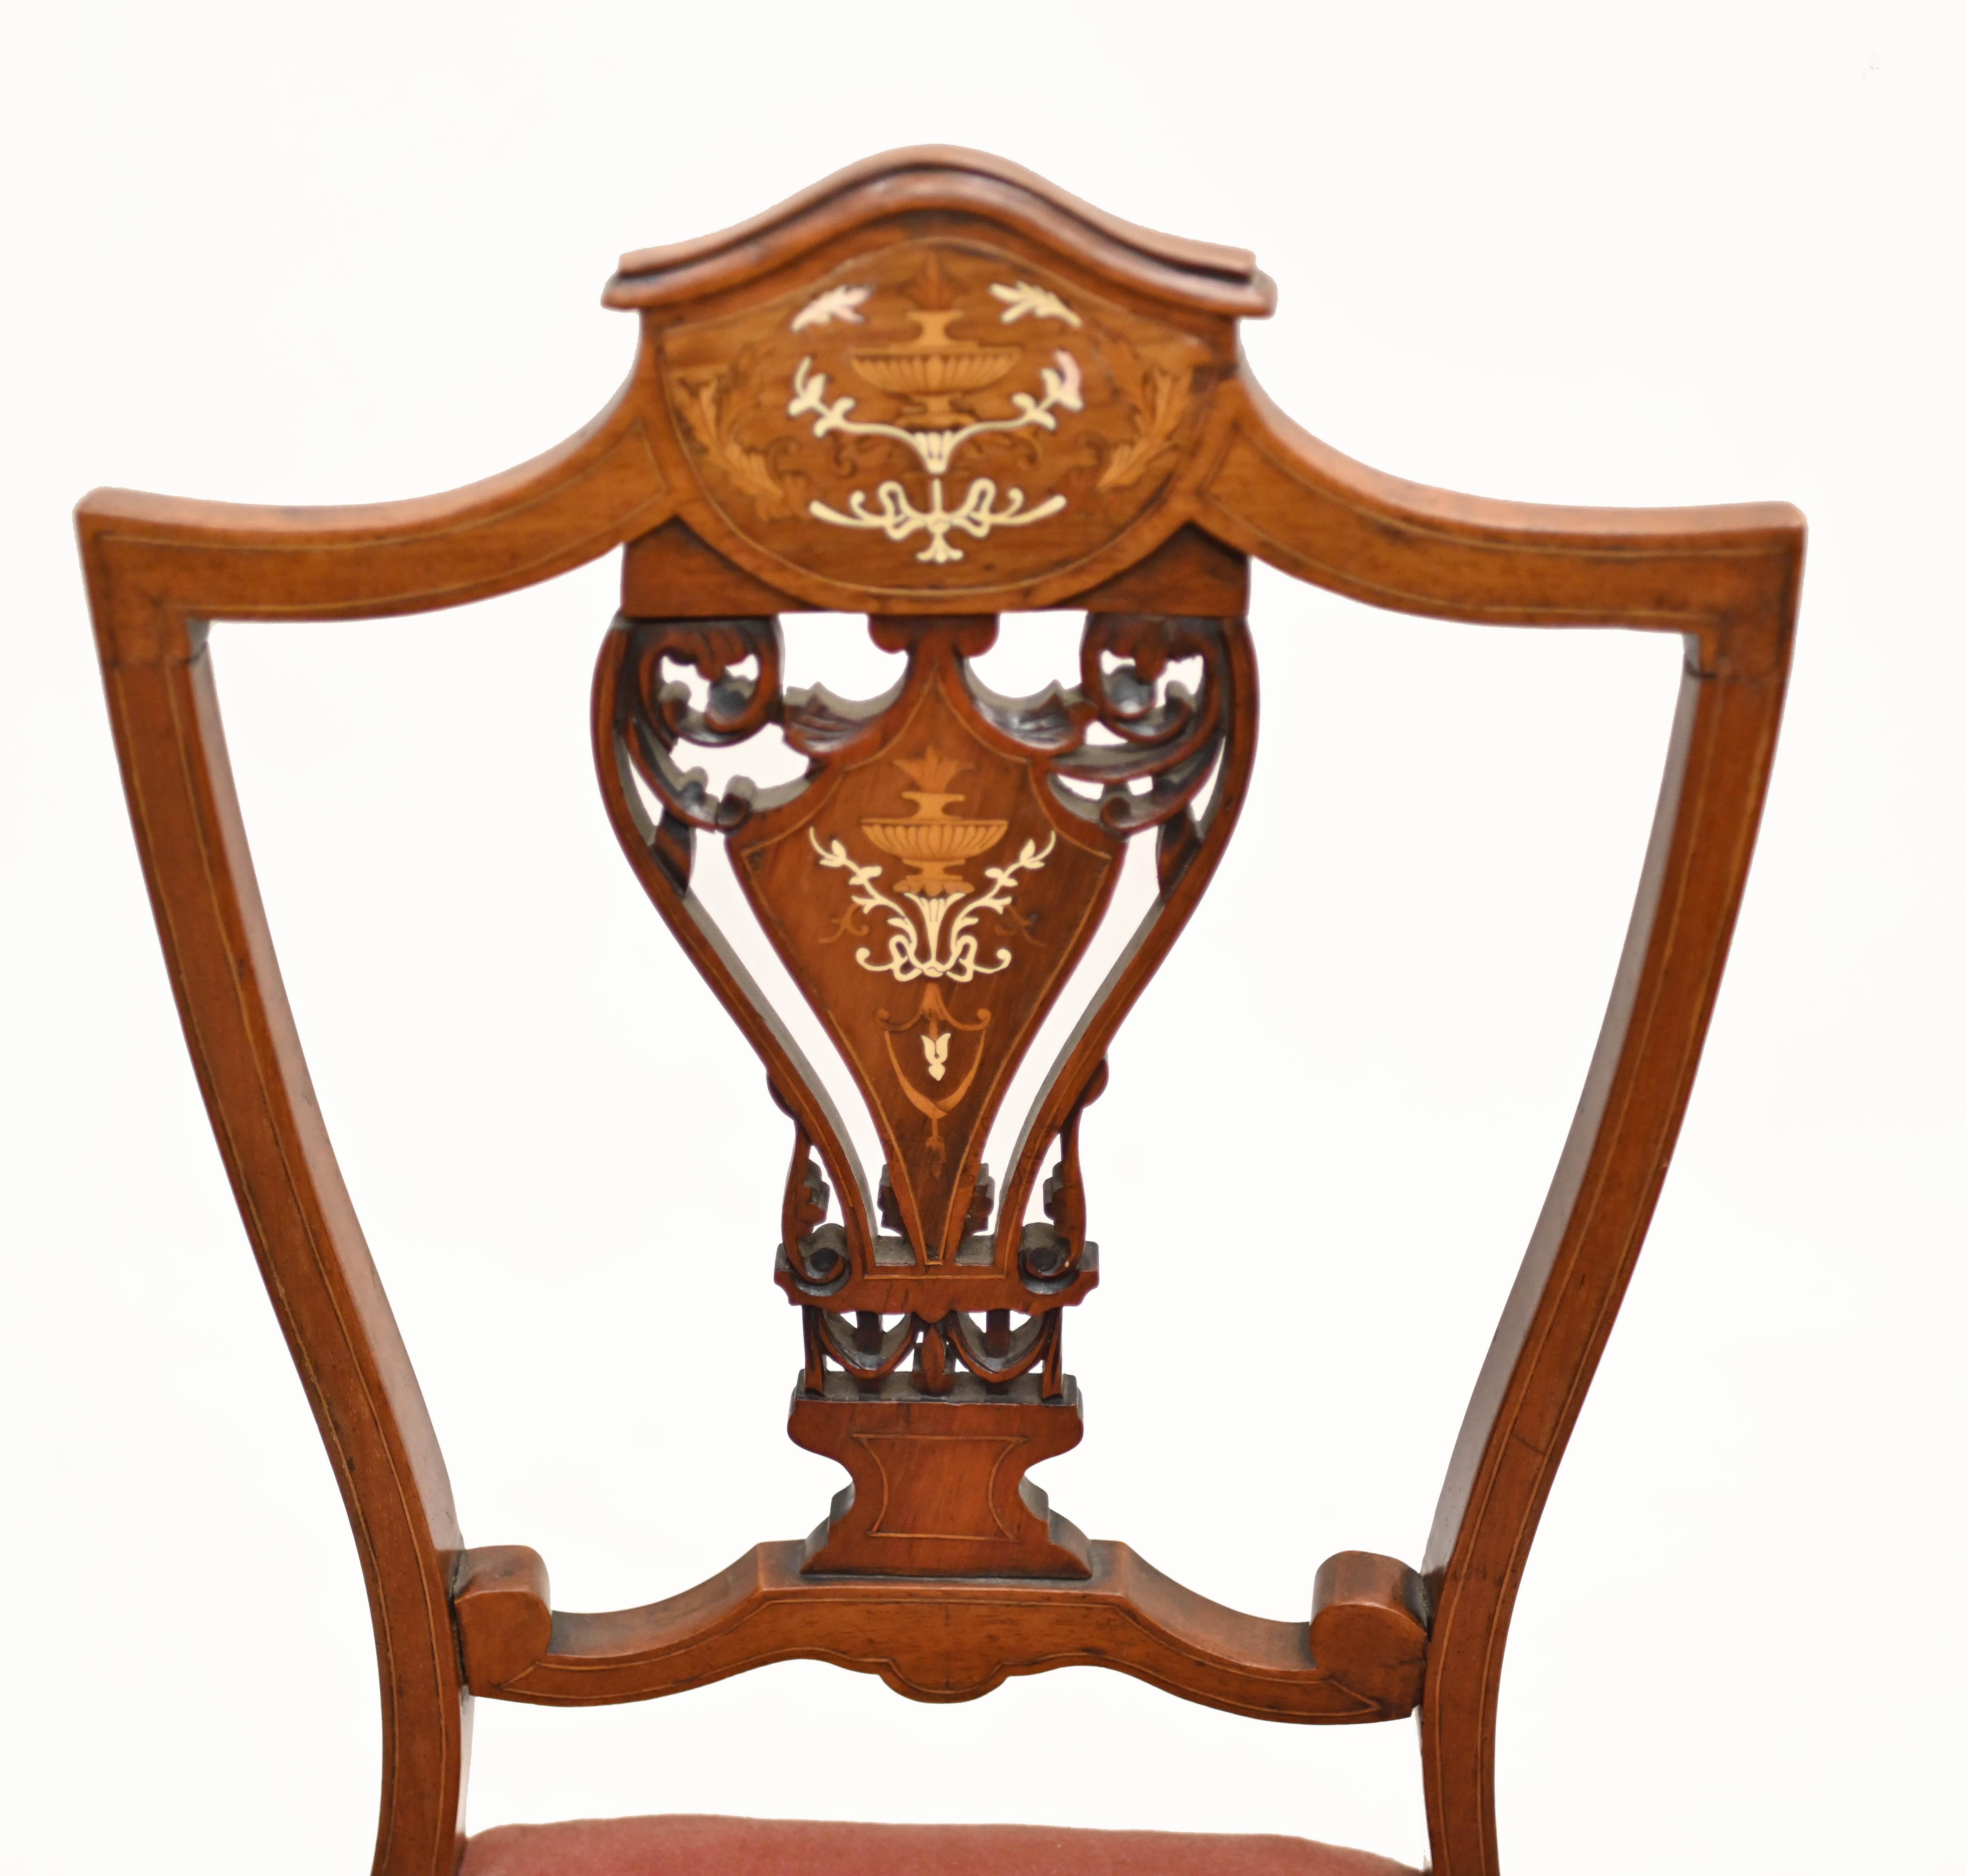 Quality pair of Edwardian inlayed hall chairs in mahogany
We date this lovely pair of accent chairs to circa 1910
Back rest - with shield back - features intricate inlay work including classical urns and floral motifs
Purchased from a private